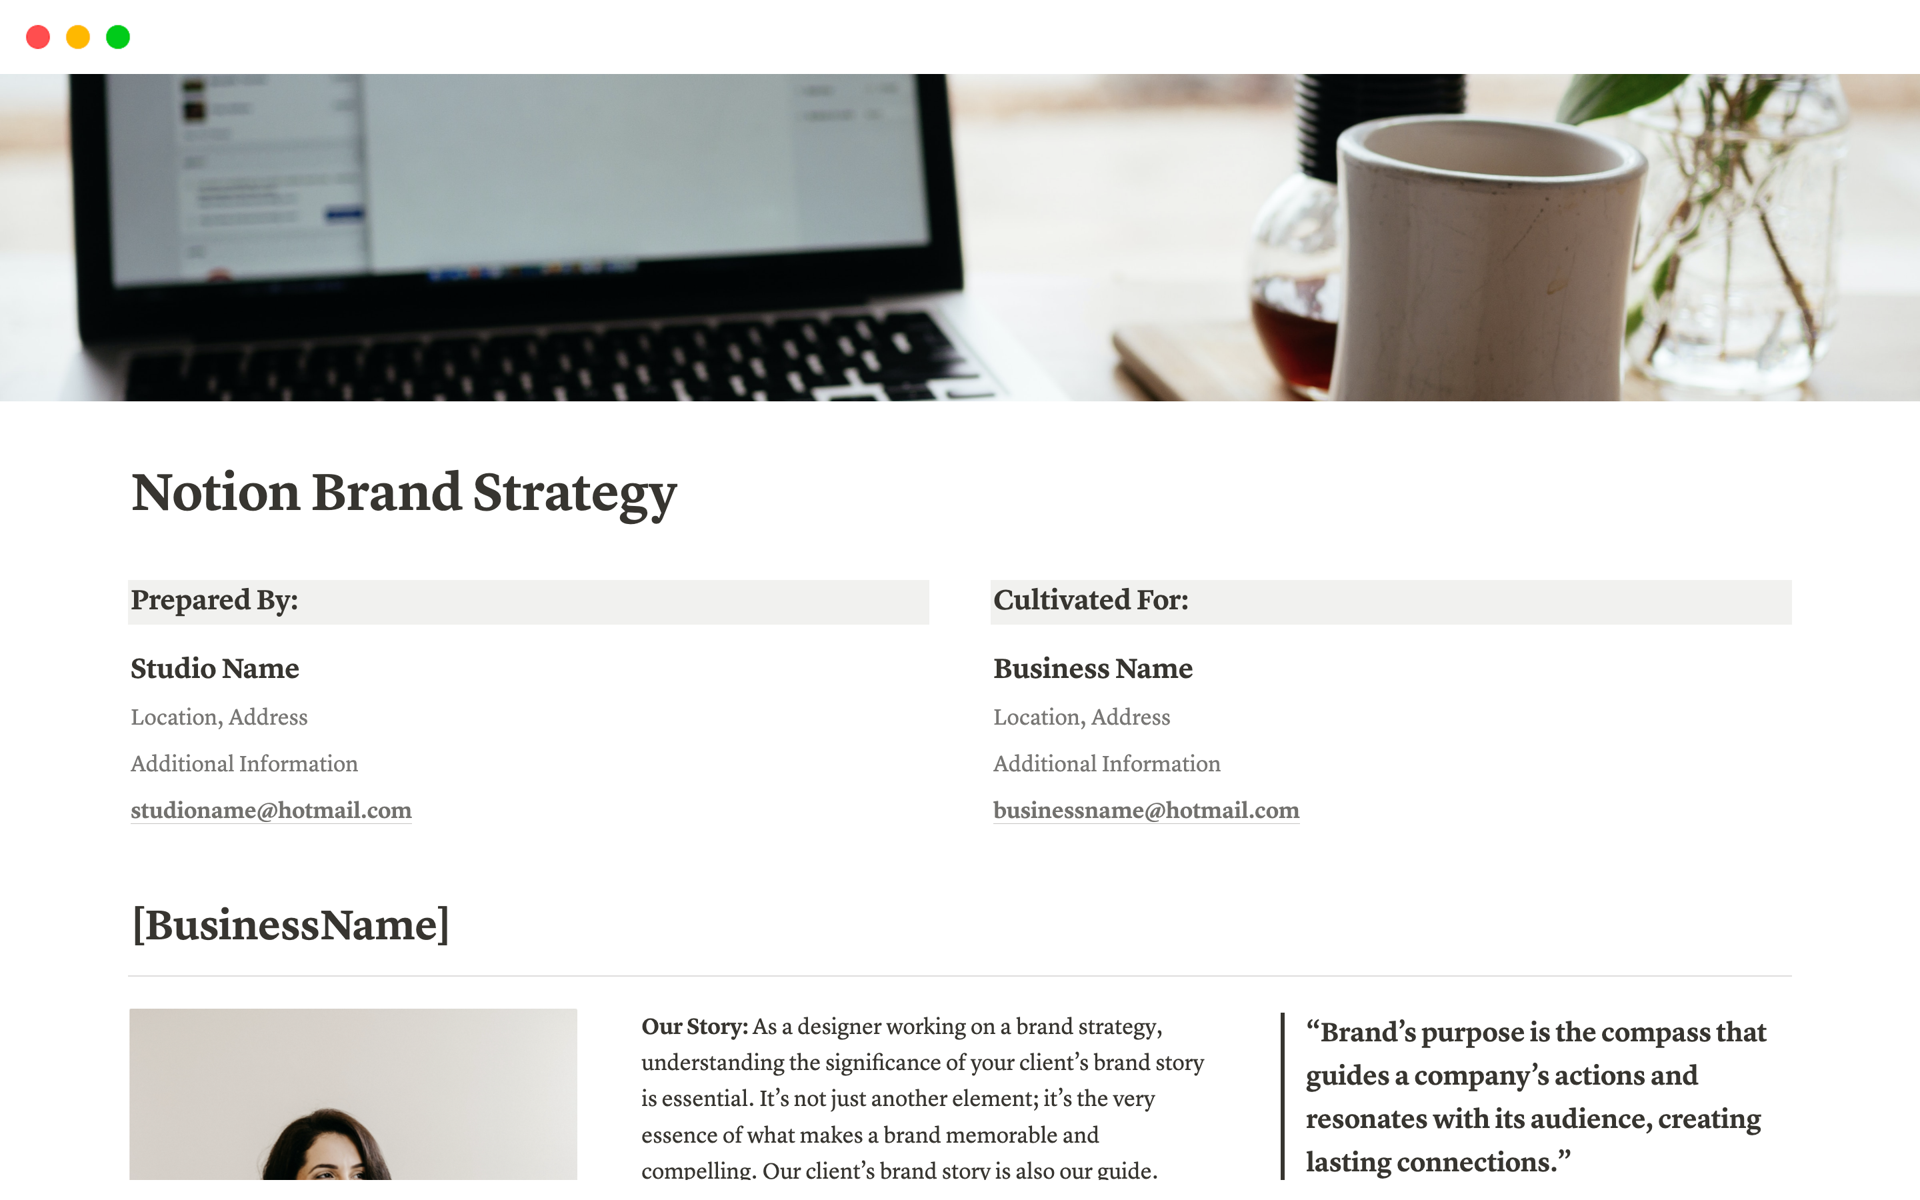 PRESENTING OUR BRAND STRATEGY TEMPLATE FOR NOTION!